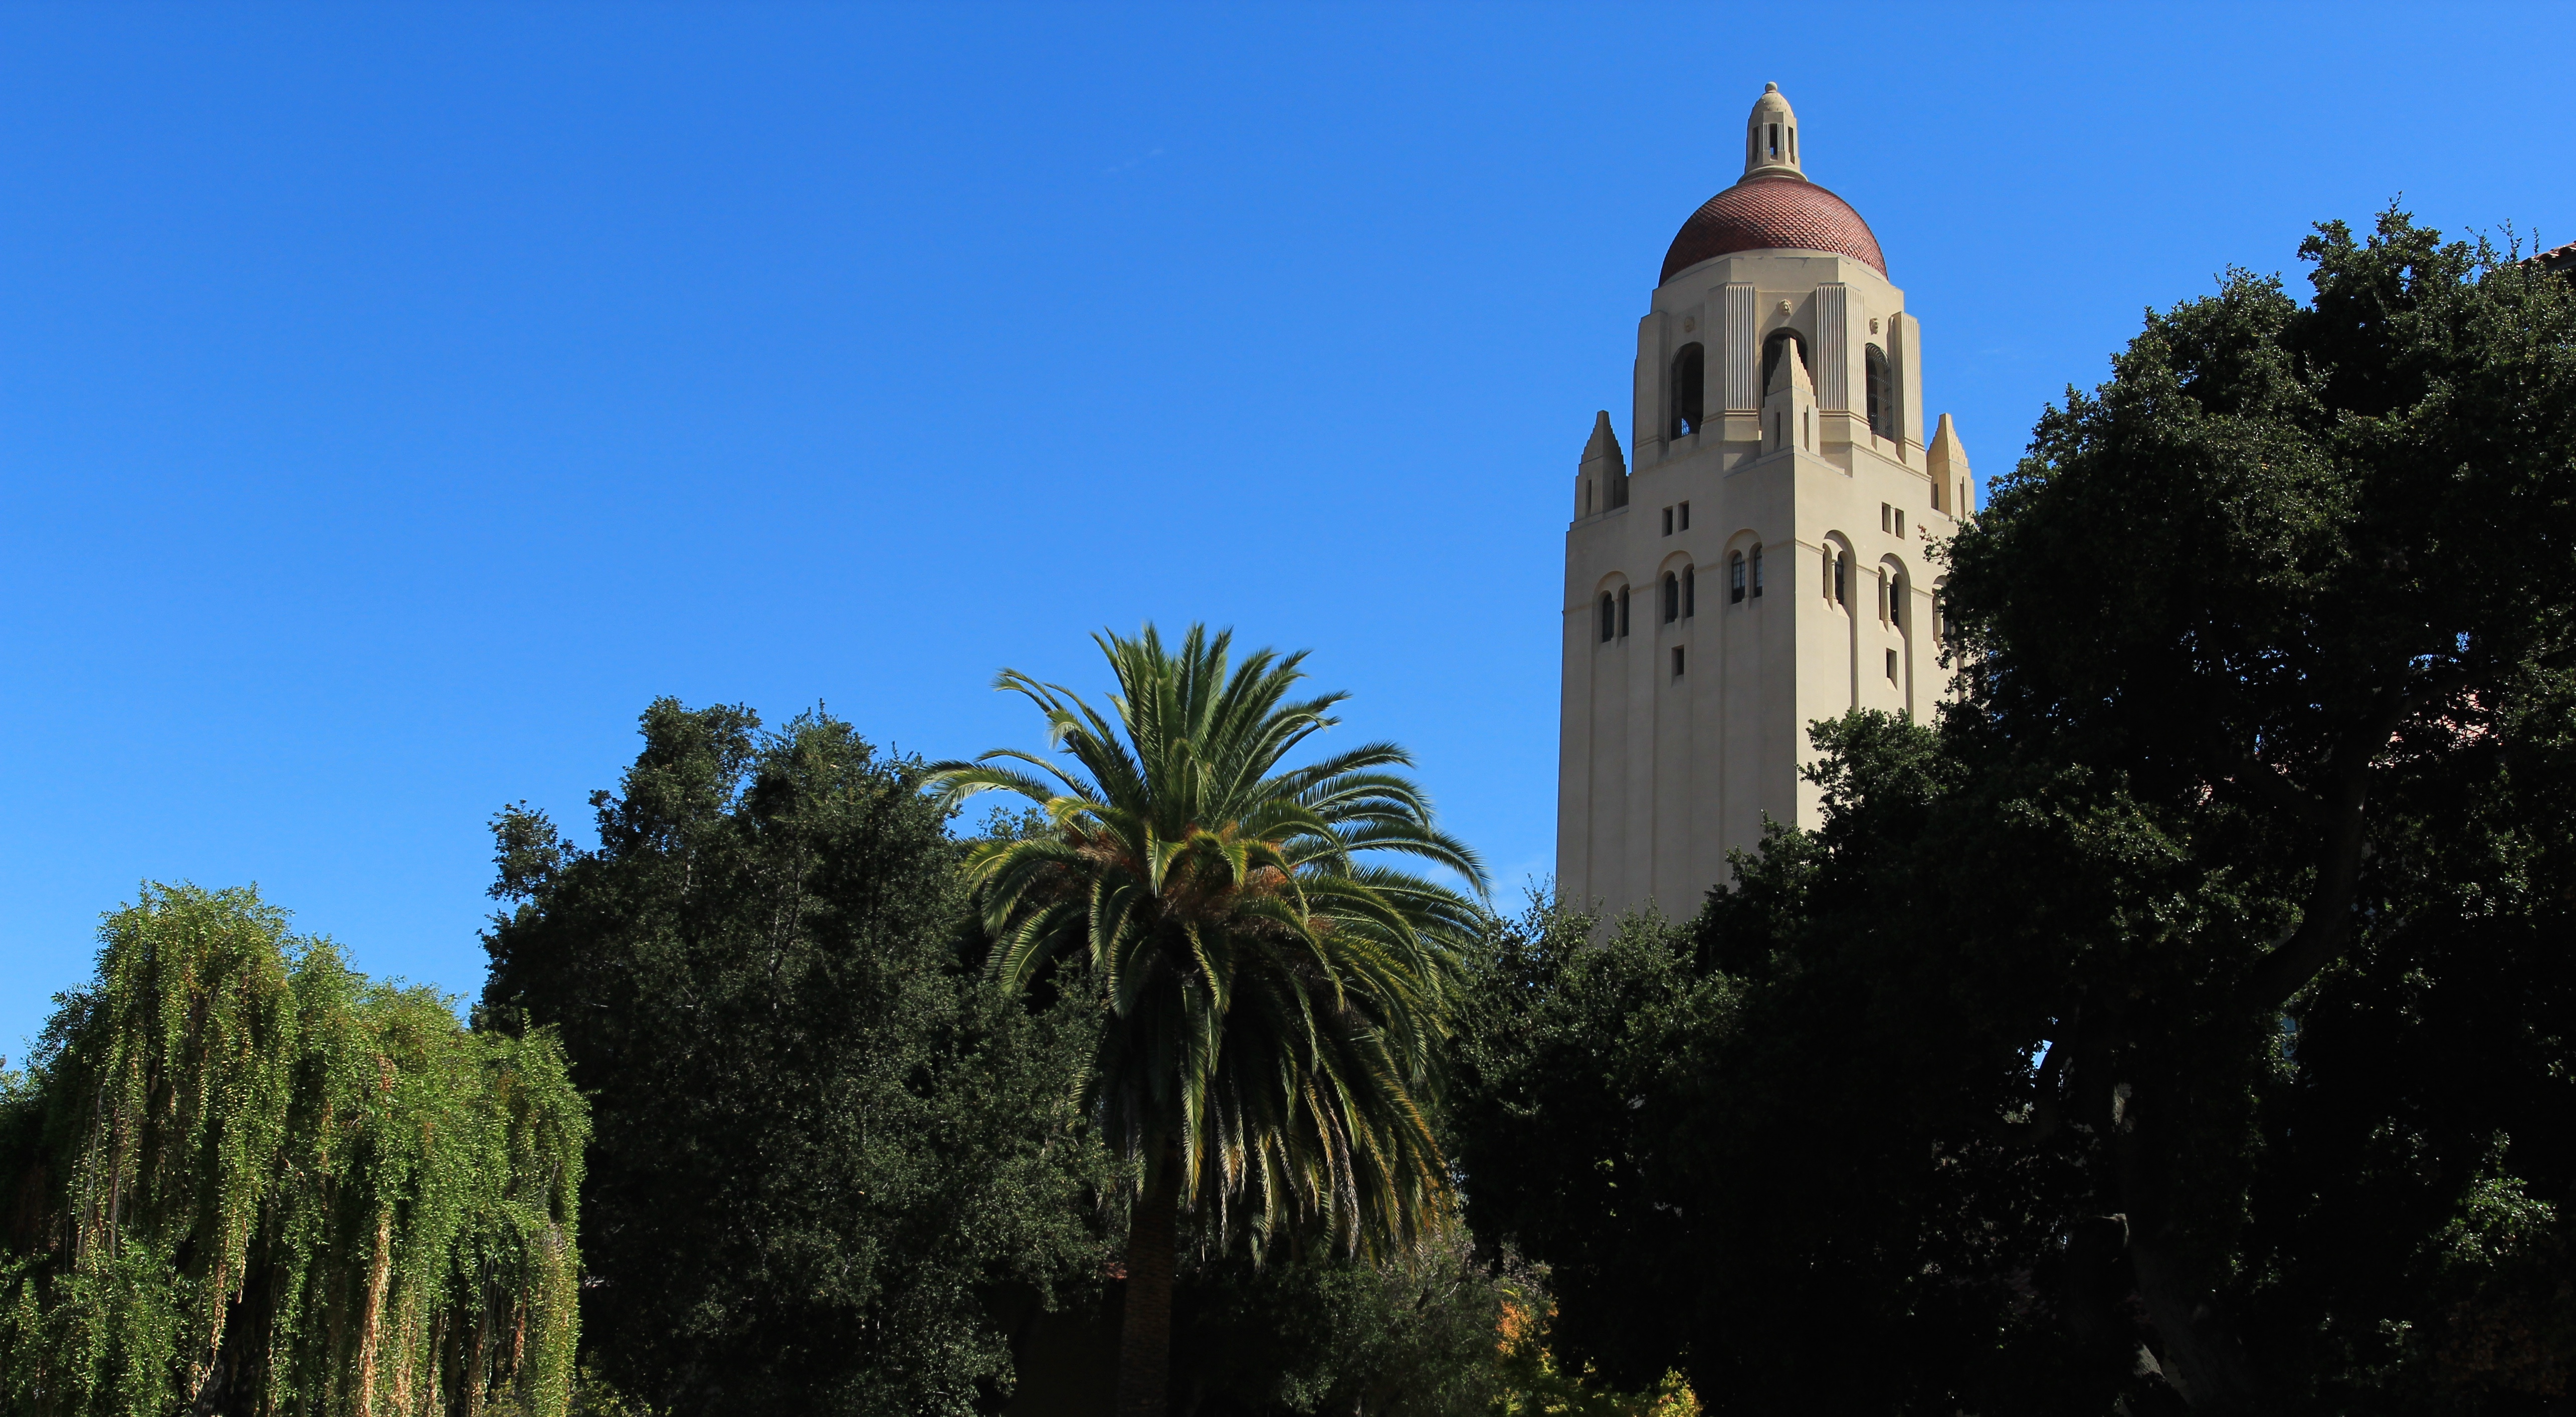 Hoover Tower - a torre de Stanford